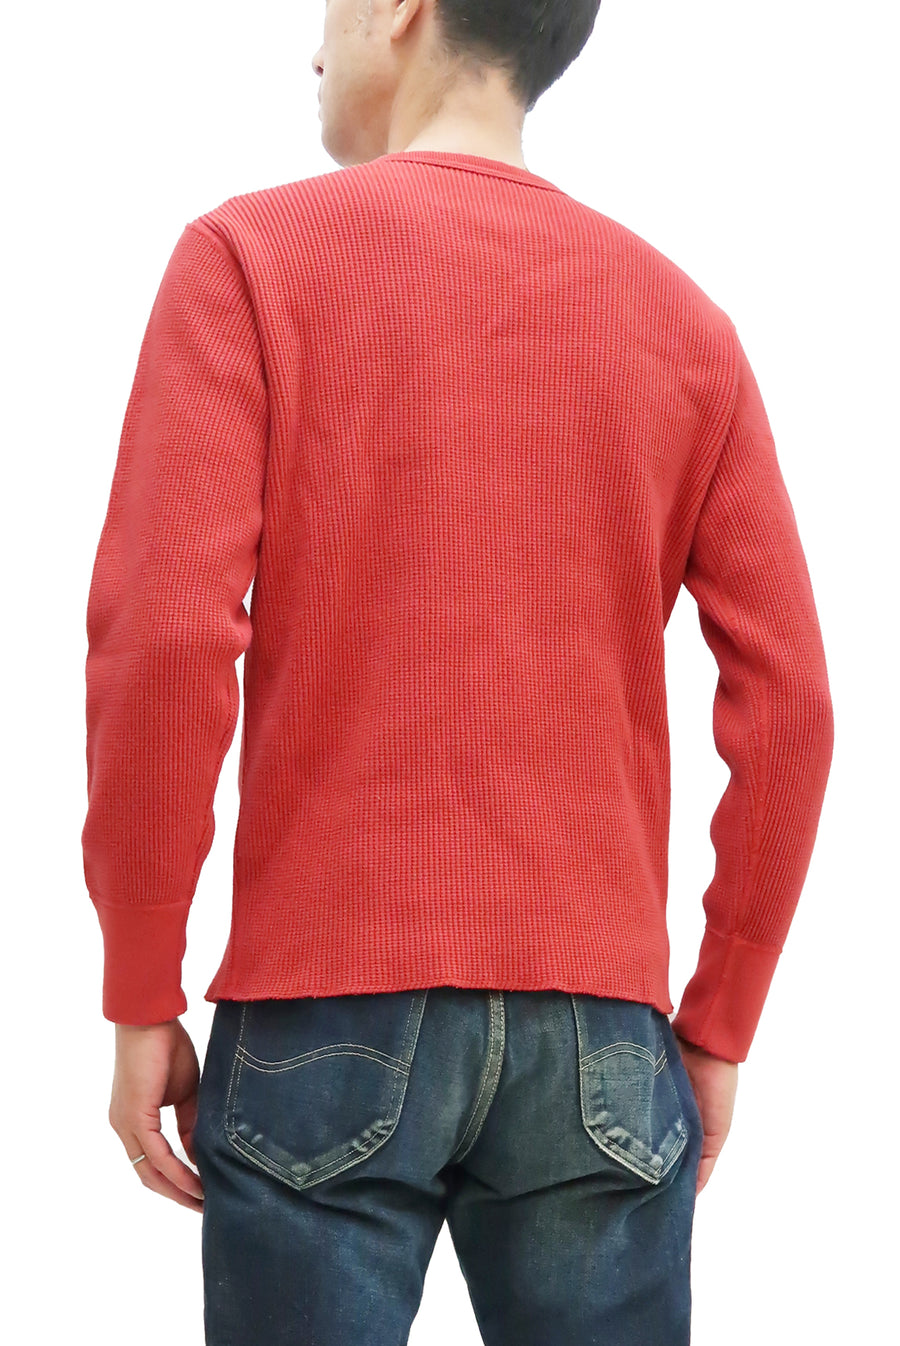 Studio D'artisan Waffle-Knit Thermal T-Shirt Men's Long Sleeve Solid Crew-Neck Super Heavyweight Thermal Tee 9936 Red